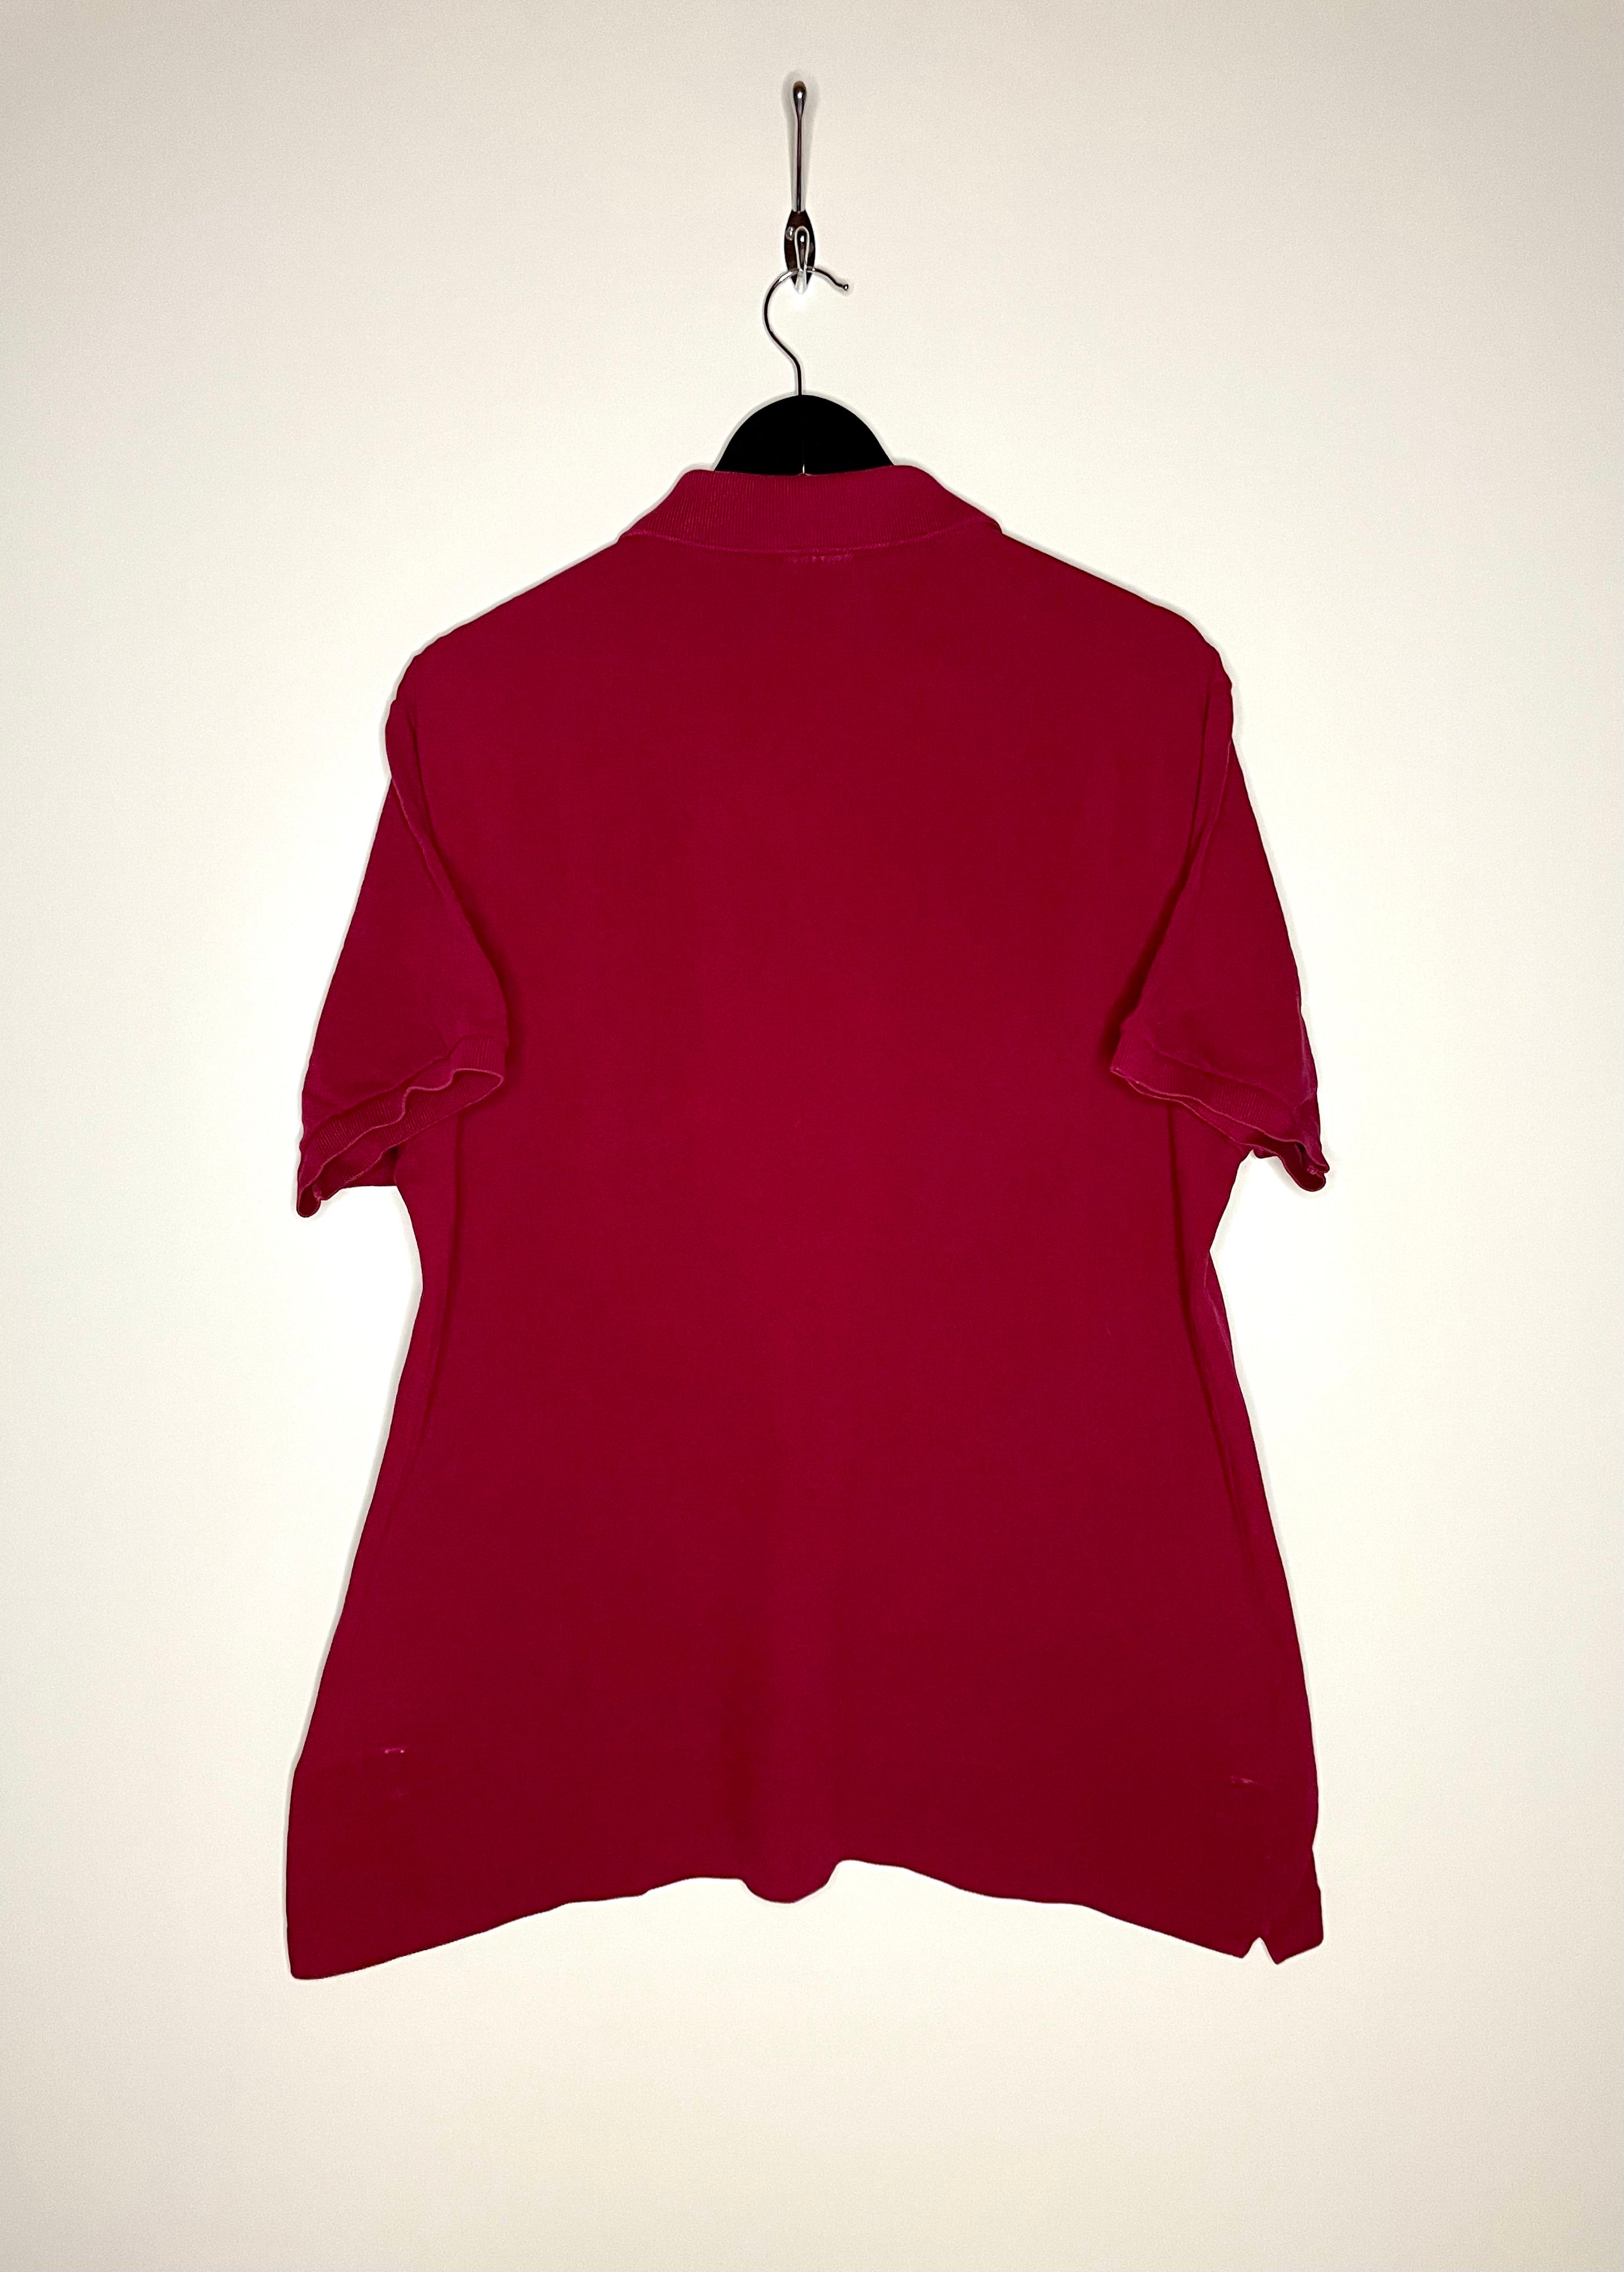 Lacoste polo shirt dark red size 2XL 